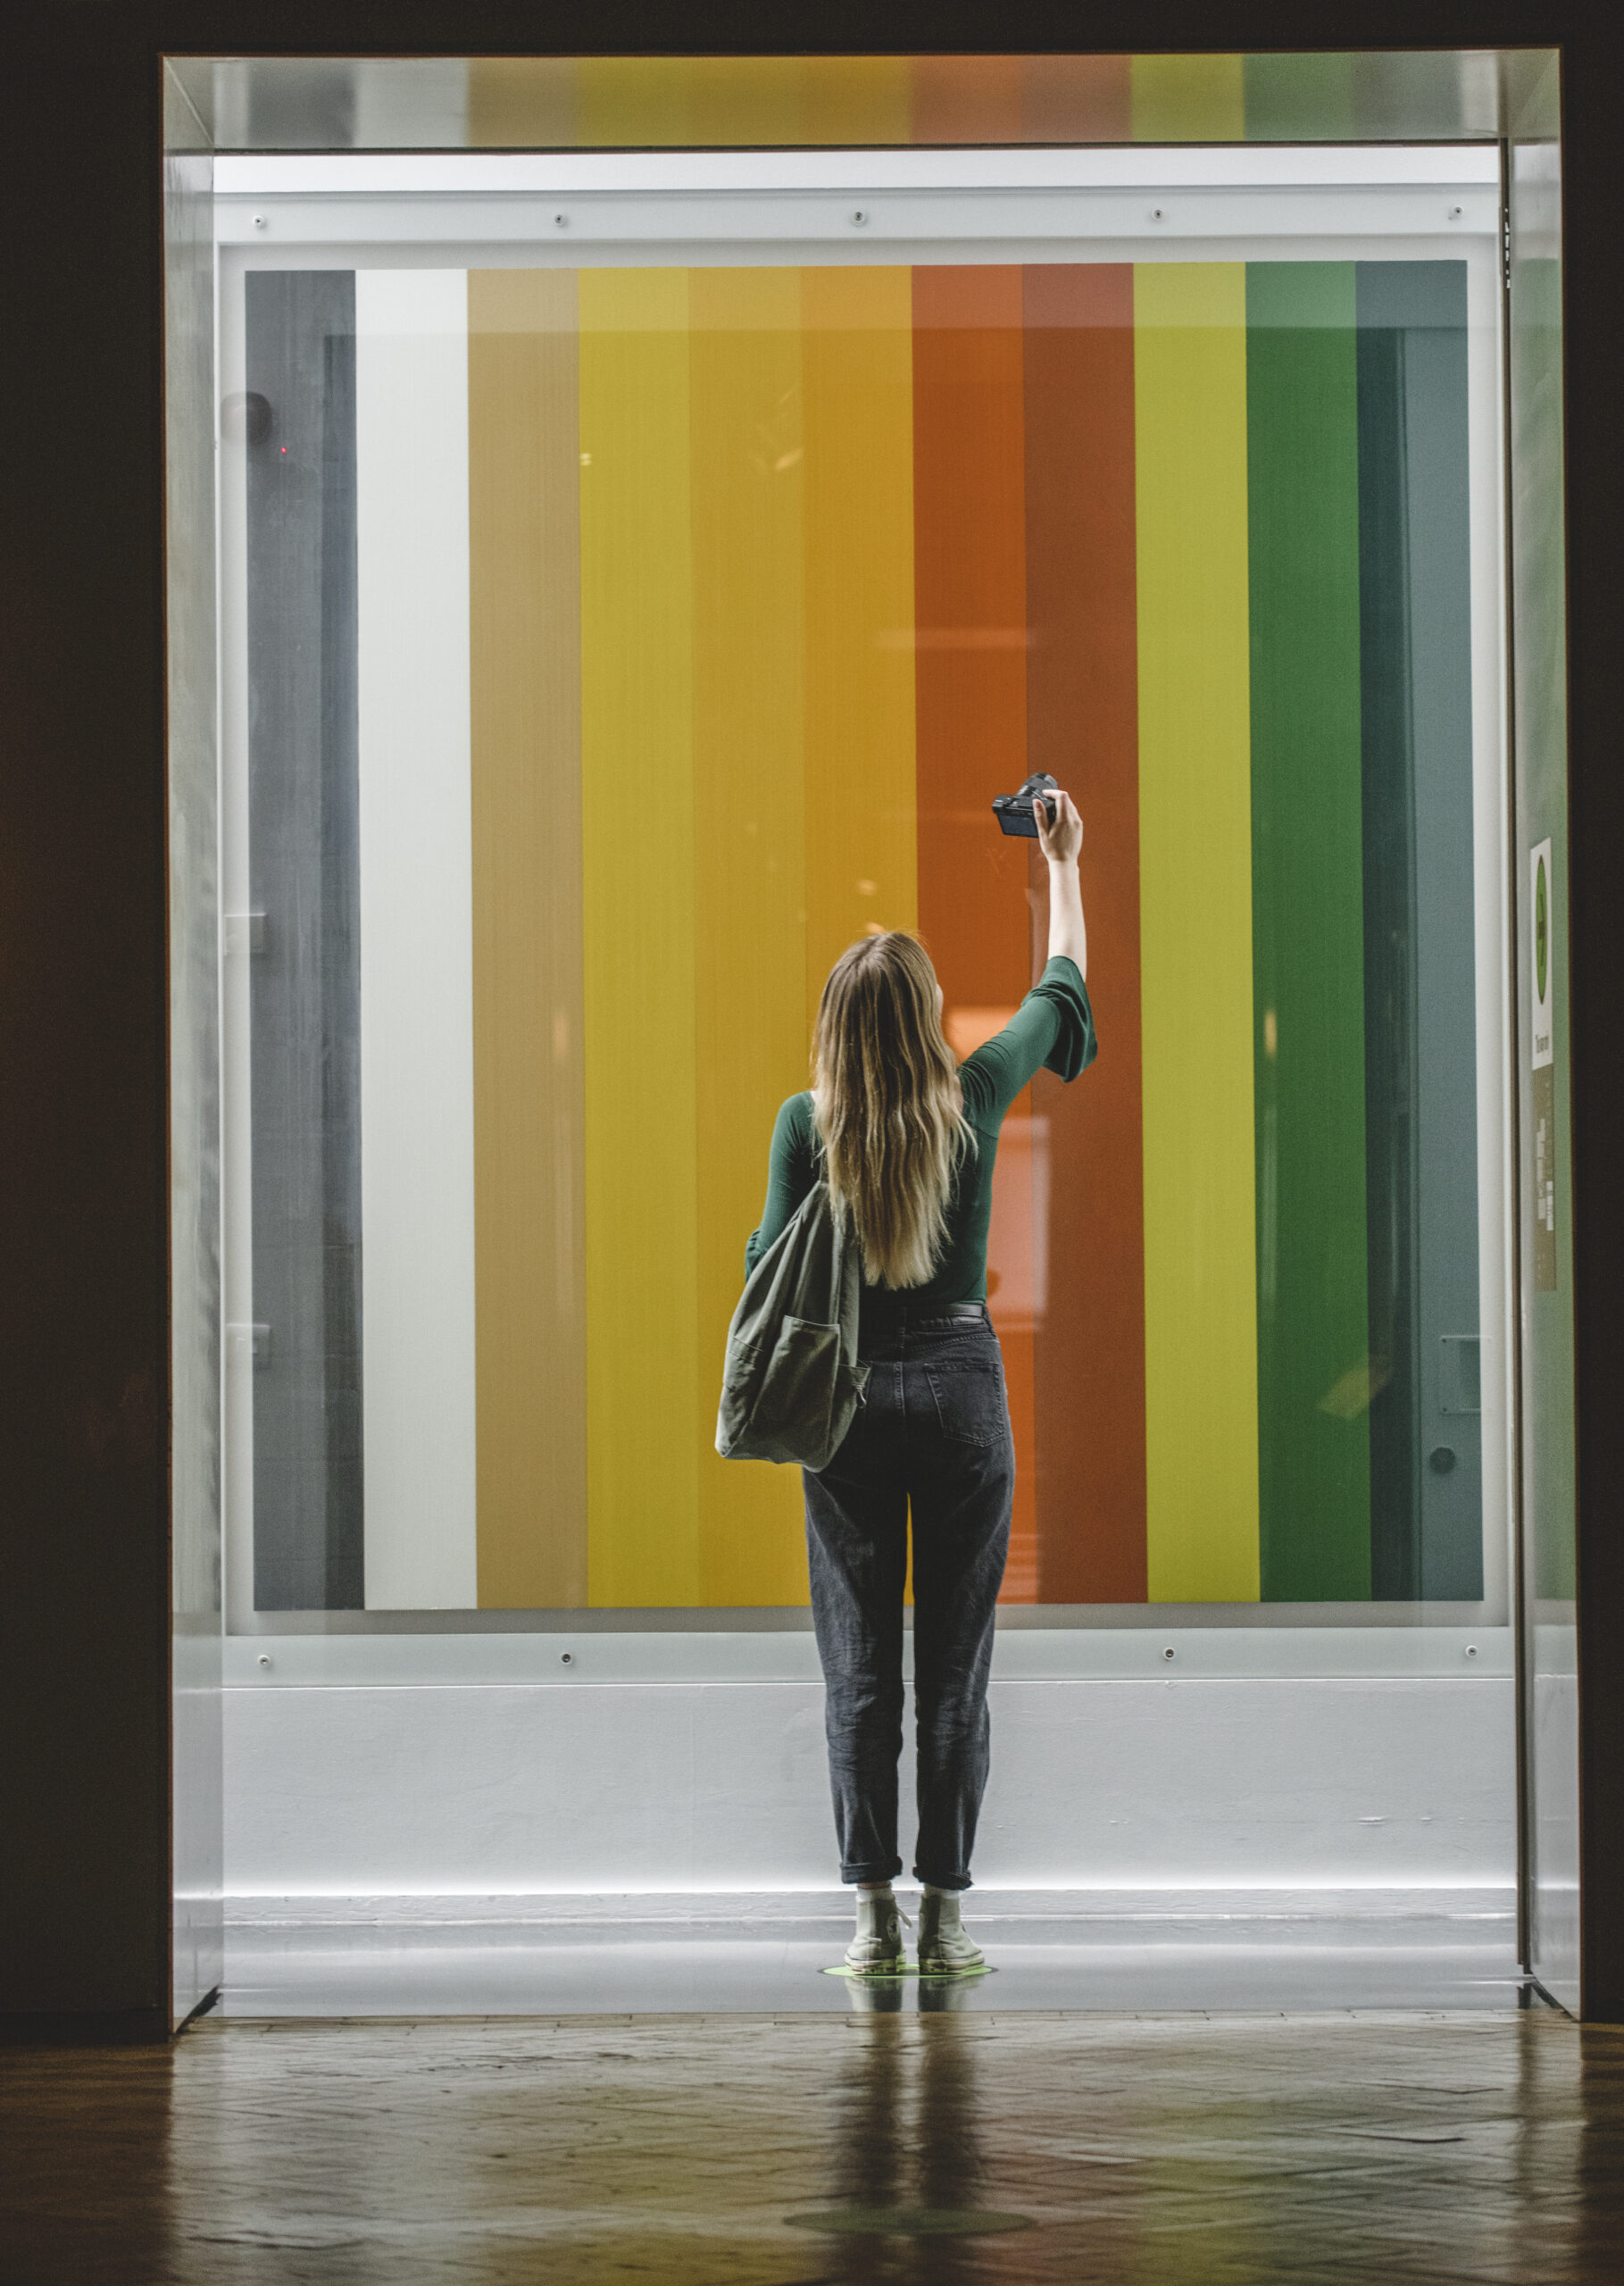 A young woman stands in one of the museum doorways with her back to the camera. She is taking a selfie of herself. In front of her is a contemporary artwork made up of stripes of coloured paint.